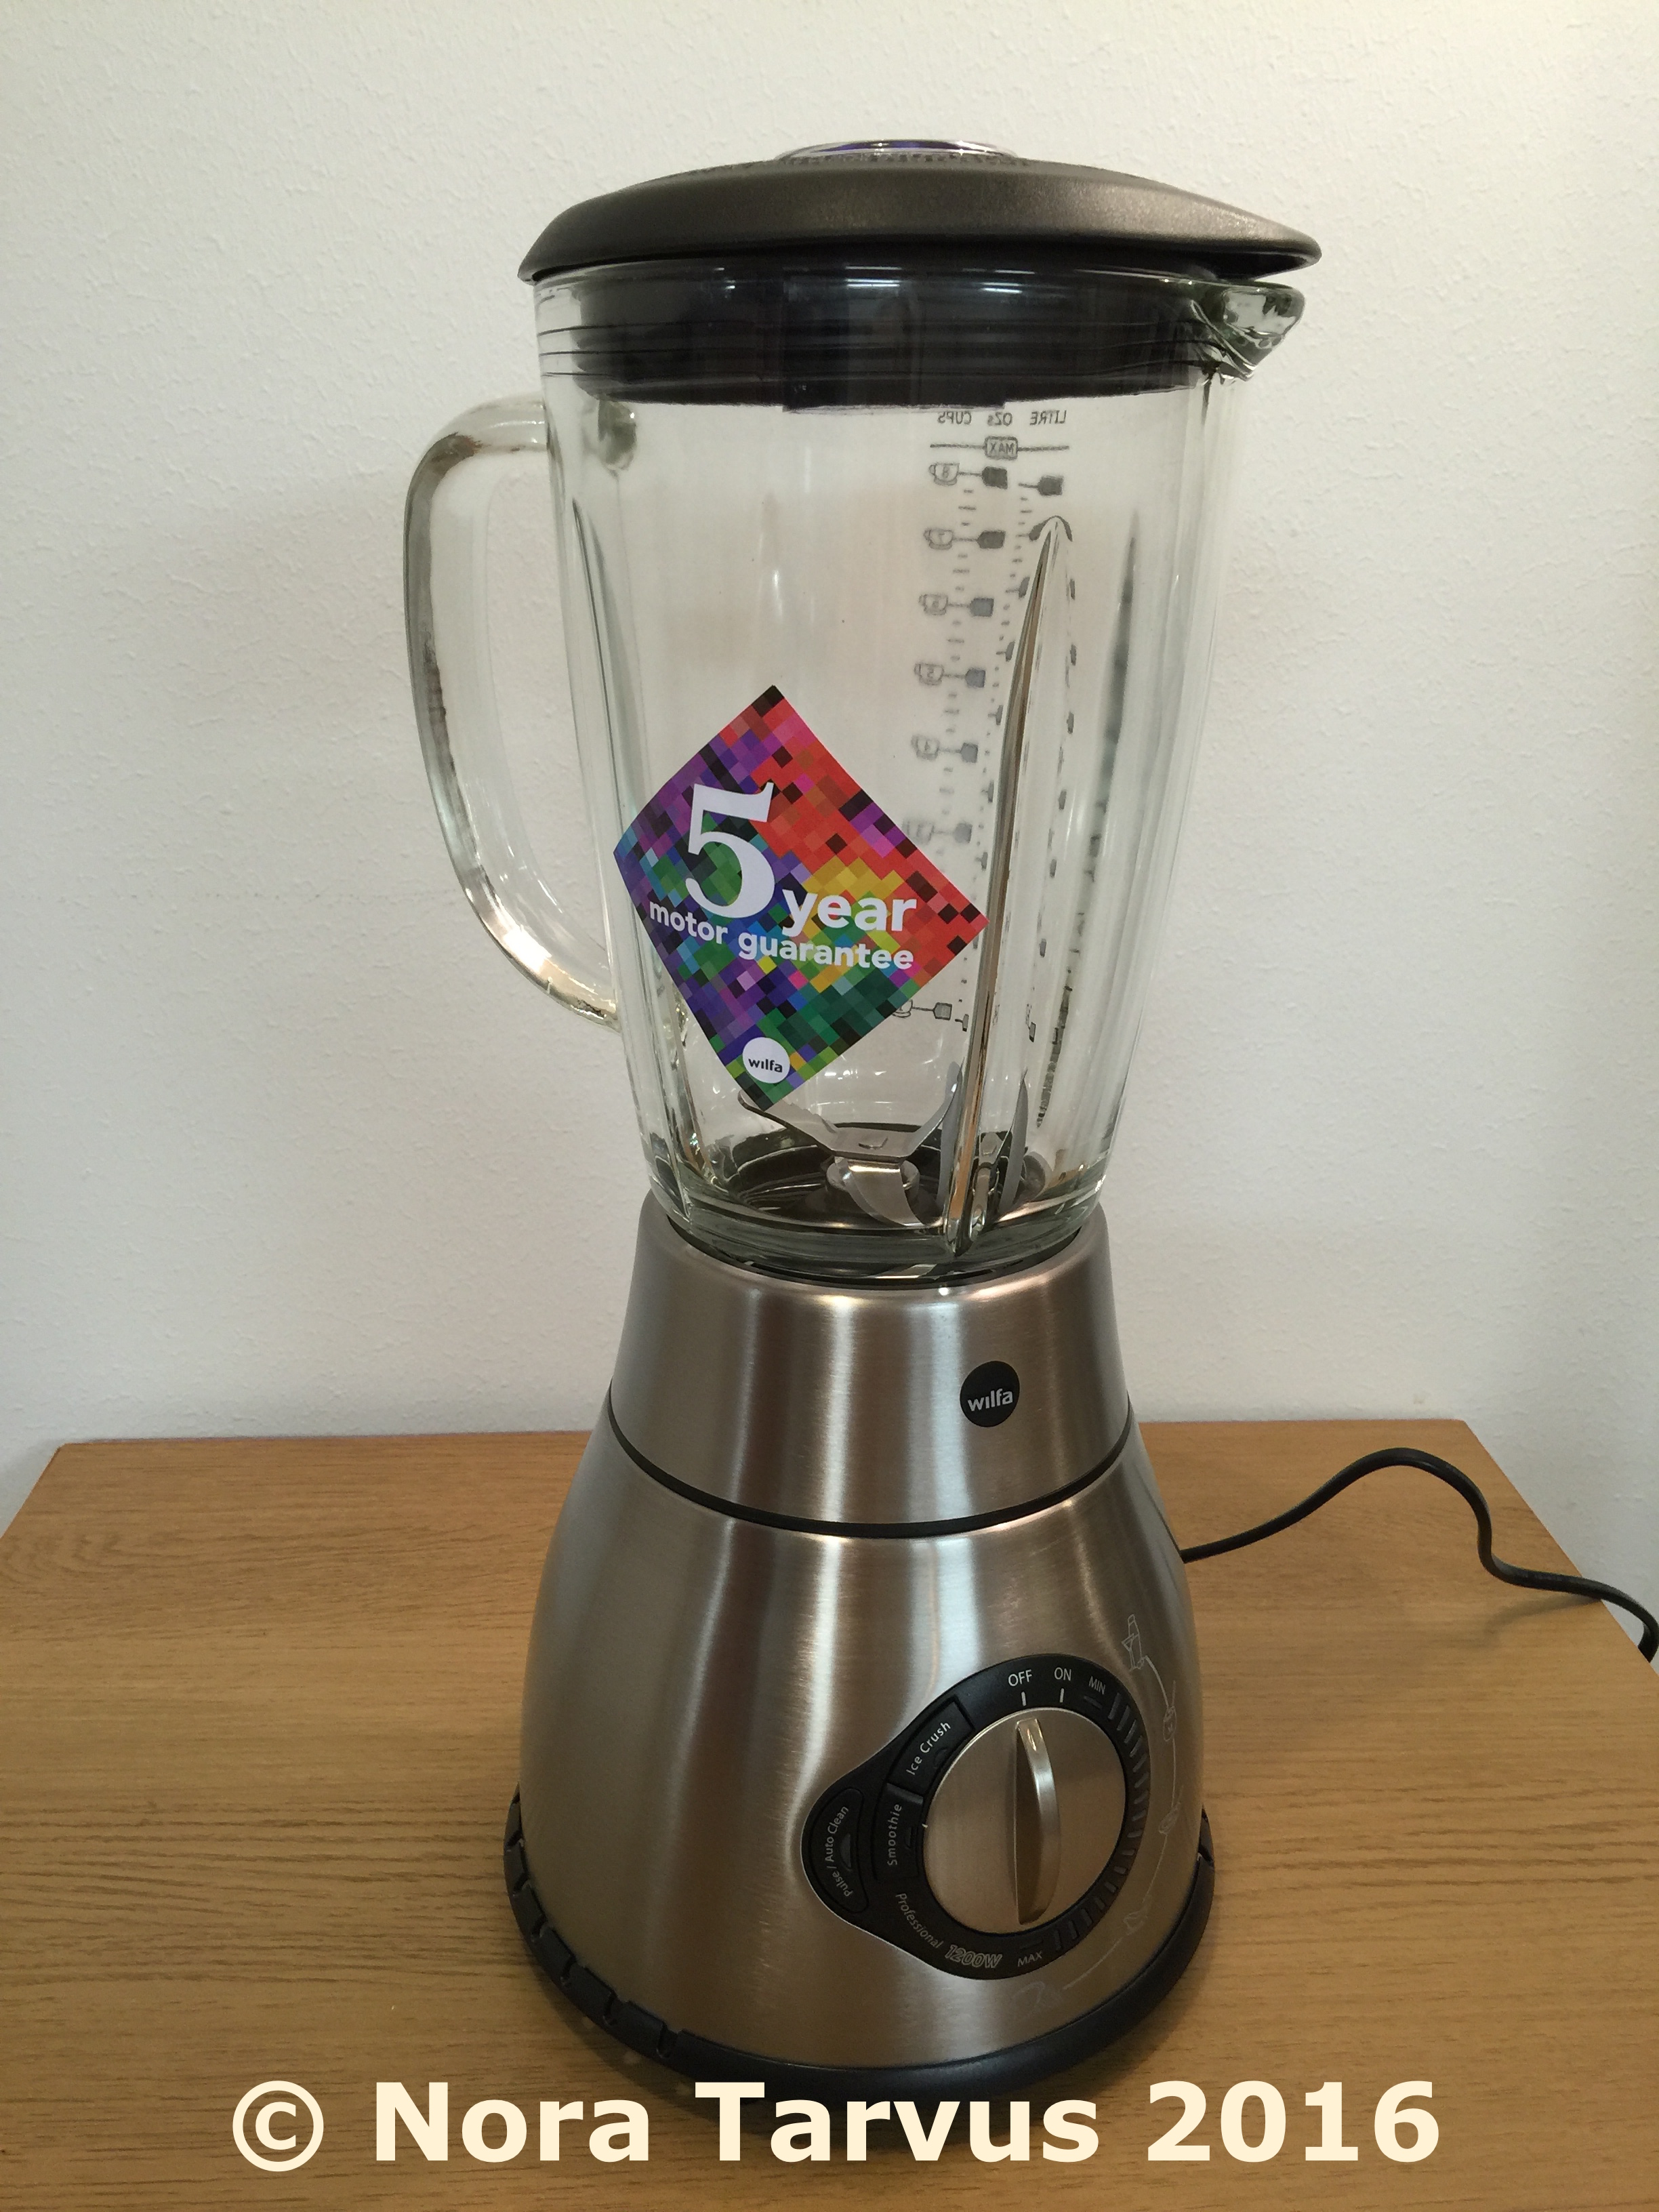 skive princip omfattende New Blender for Smoothie Making – Wilfa 1200 on Review – Dreamer Achiever